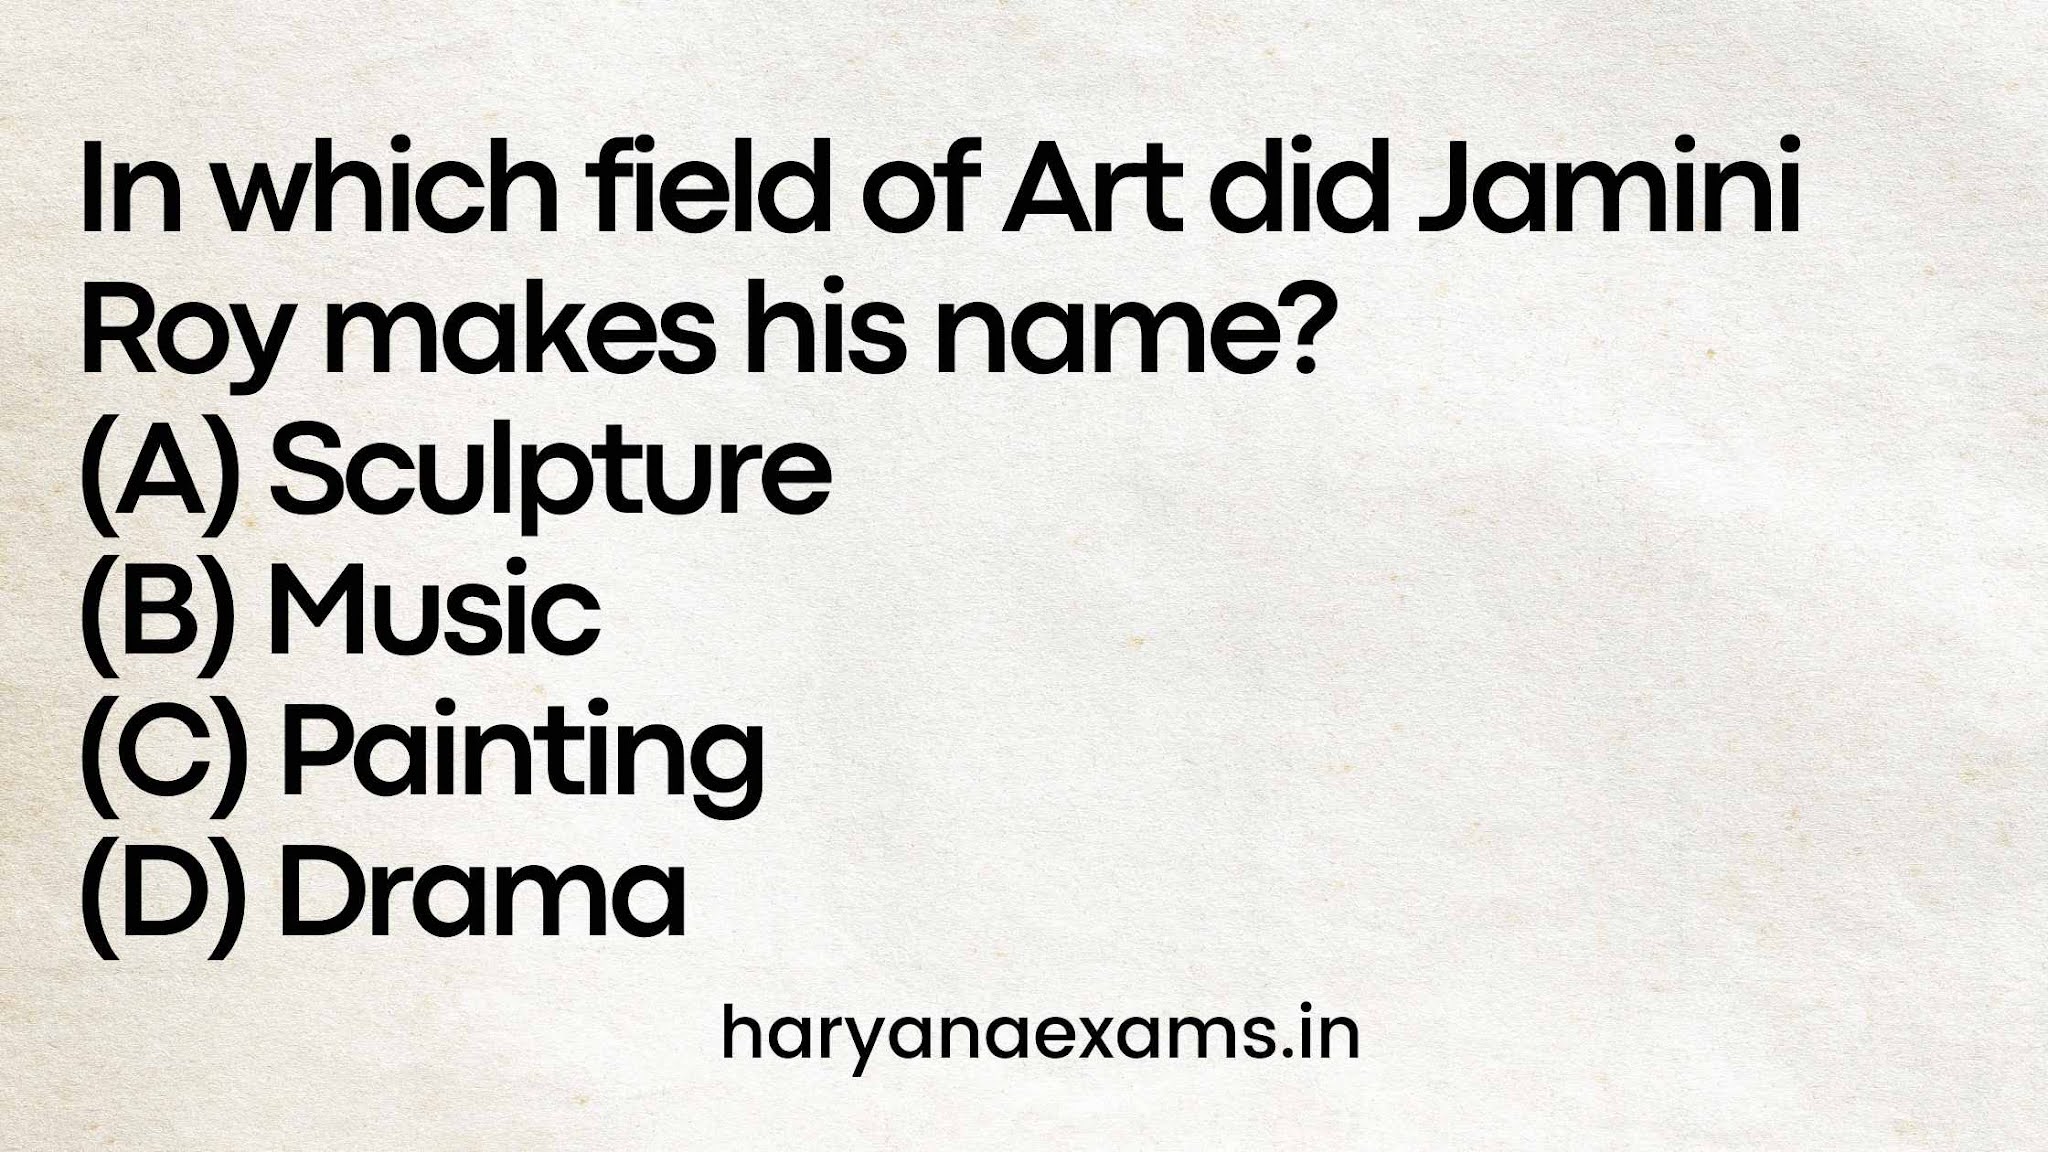 In which field of Art did Jamini Roy makes his name? (A) Sculpture (B) Music (C) Painting (D) Drama